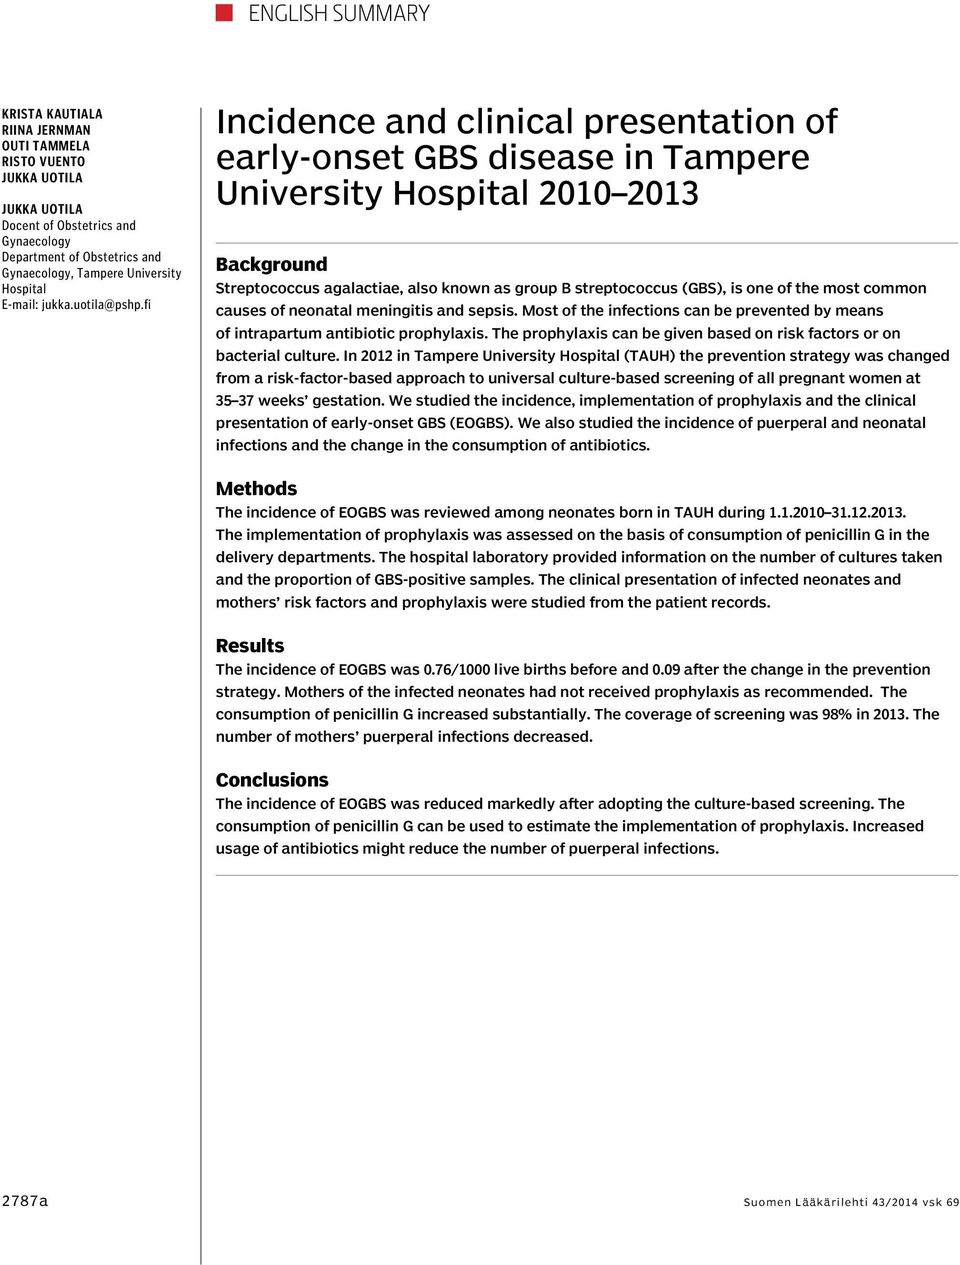 fi Incidence and clinical presentation of early-onset GBS disease in Tampere University Hospital 2010 2013 Background Streptococcus agalactiae, also known as group B streptococcus (GBS), is one of